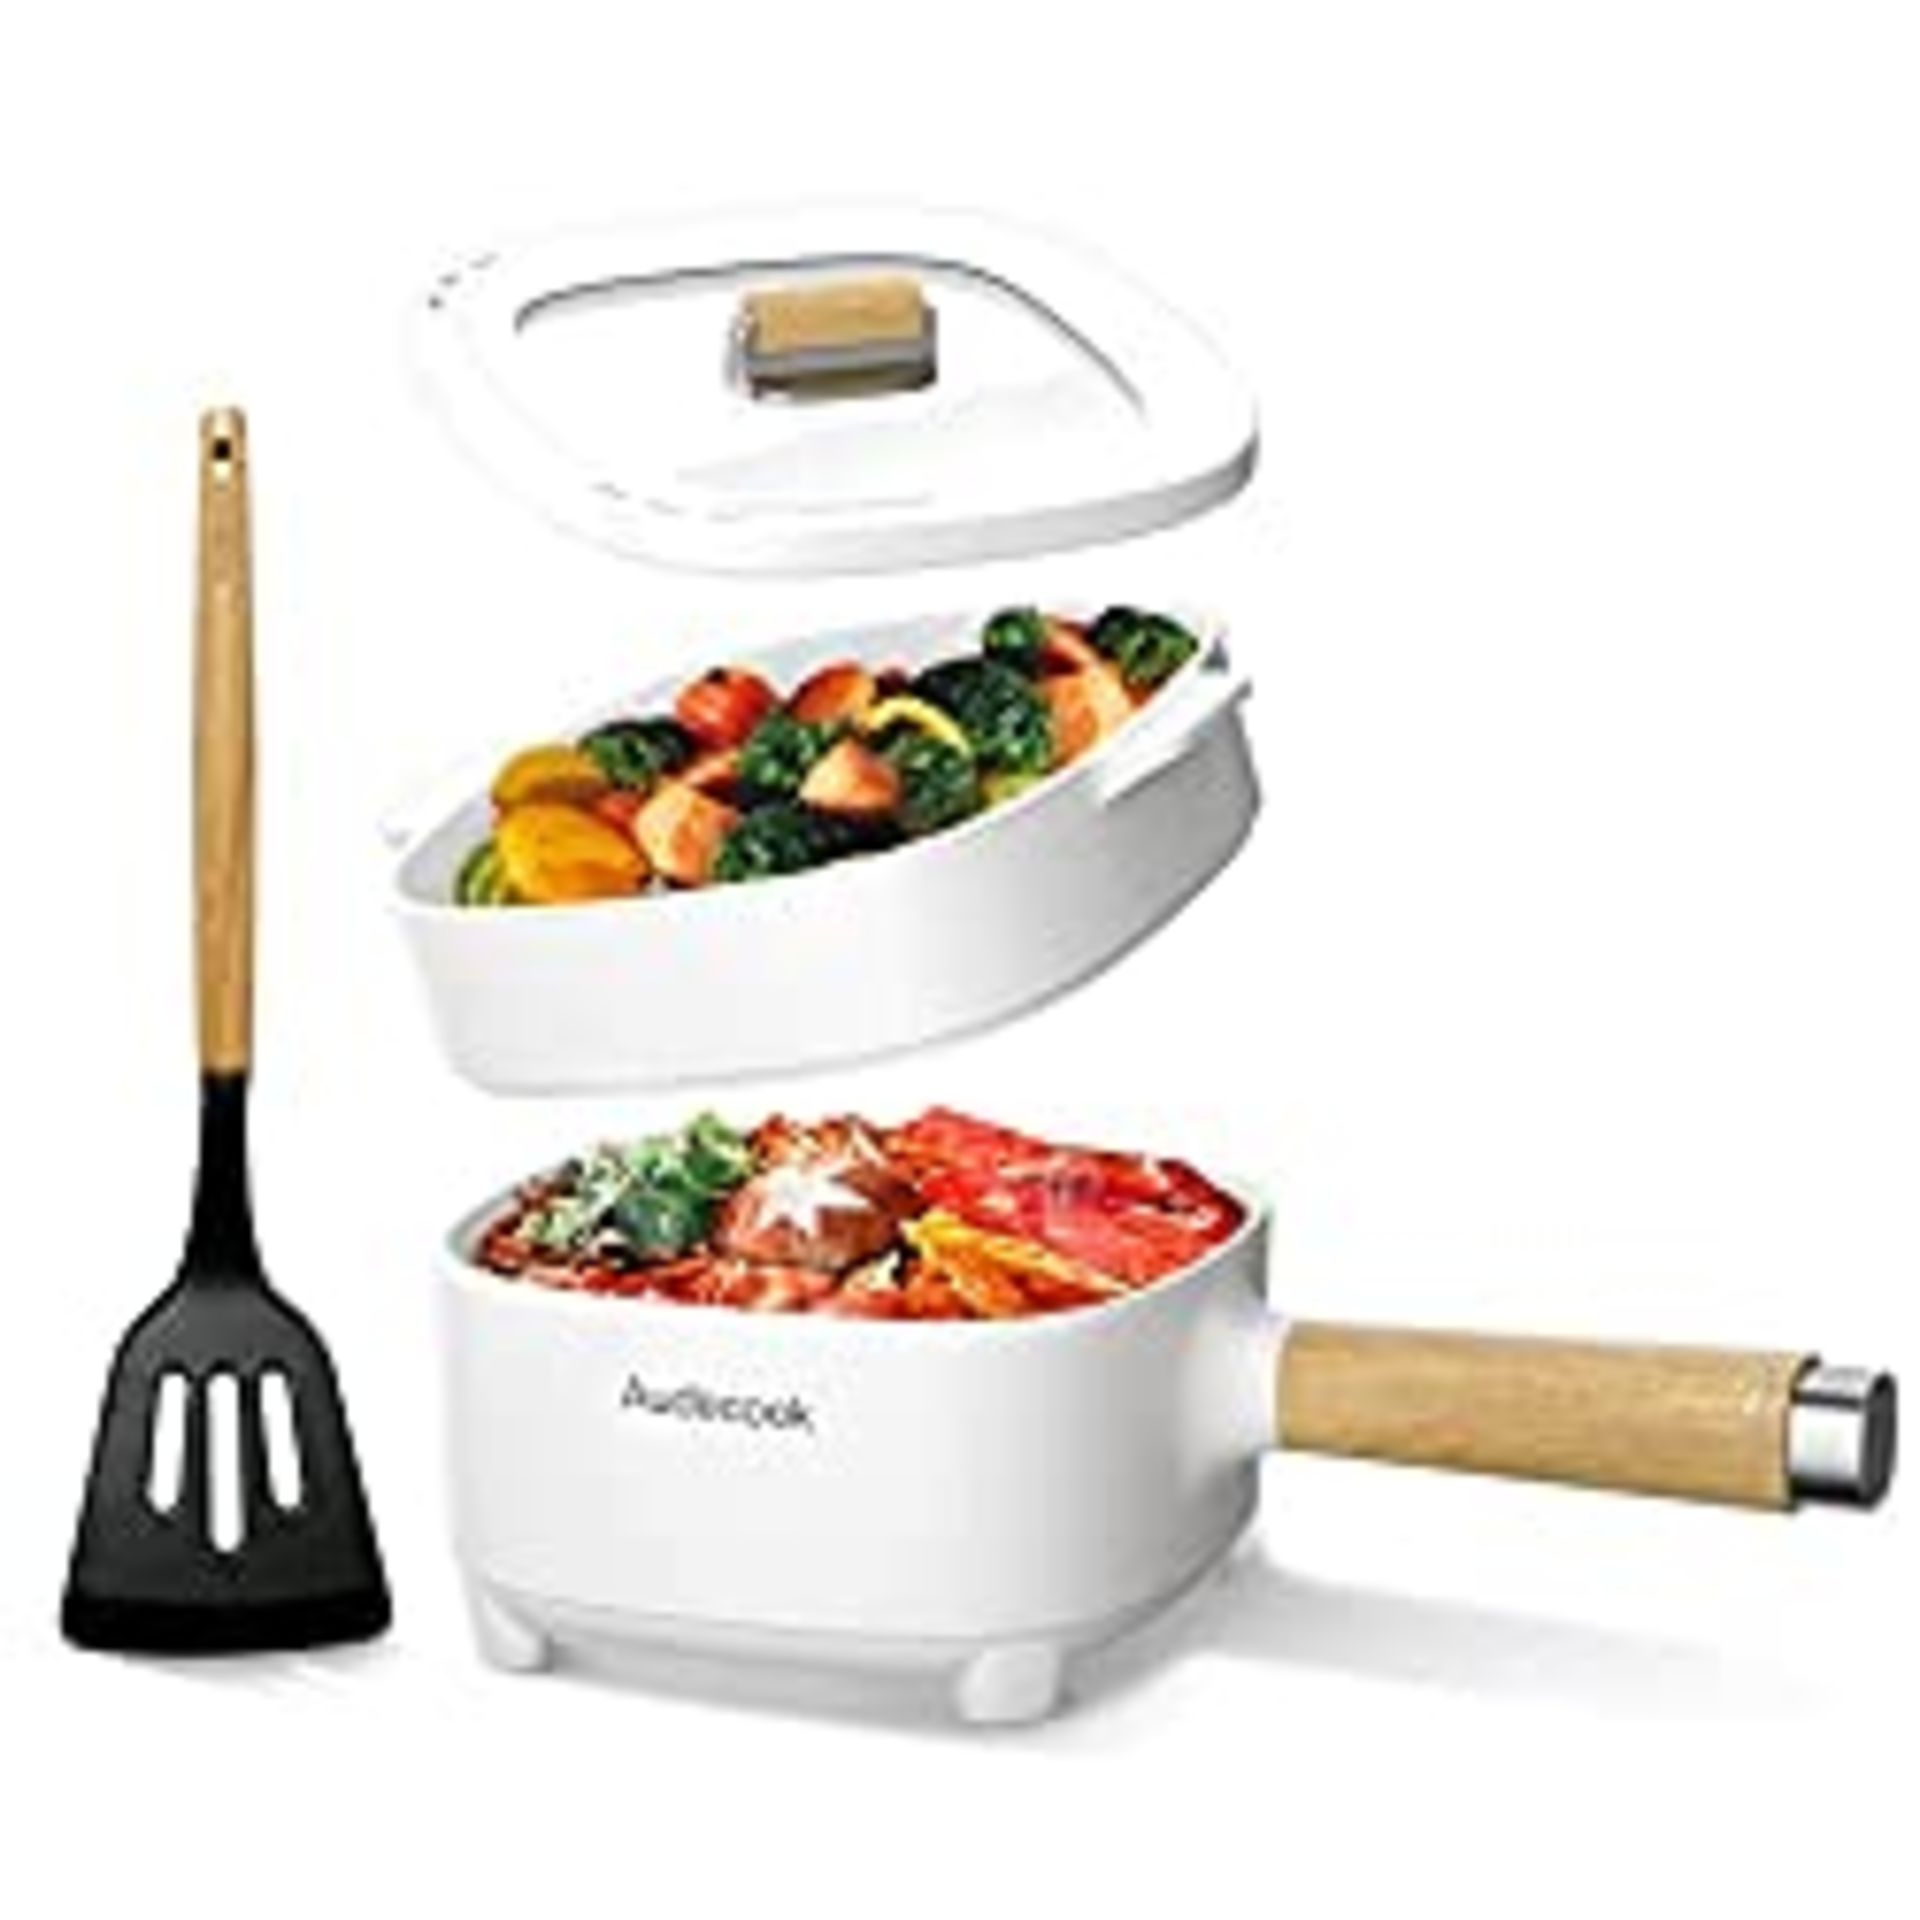 RRP £43.40 Audecook Electric Hot Pot with Steamer 2L - Image 2 of 4